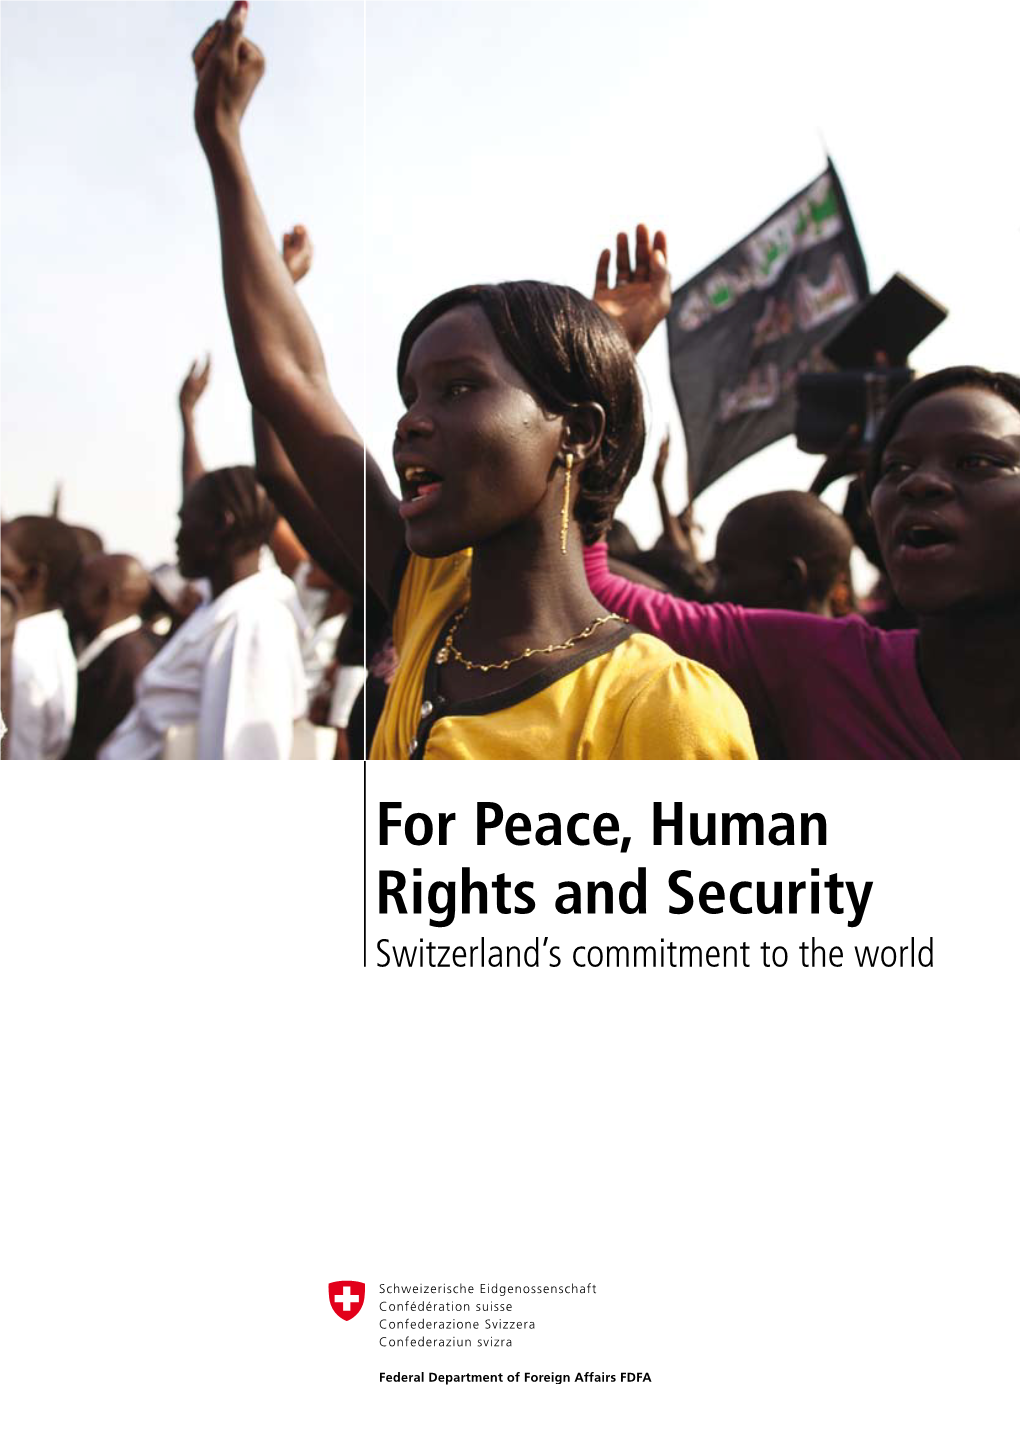 For Peace, Human Rights and Security Switzerland’S Commitment to the World 2 “We Are Better Off When Others Around the World Are Doing Well”